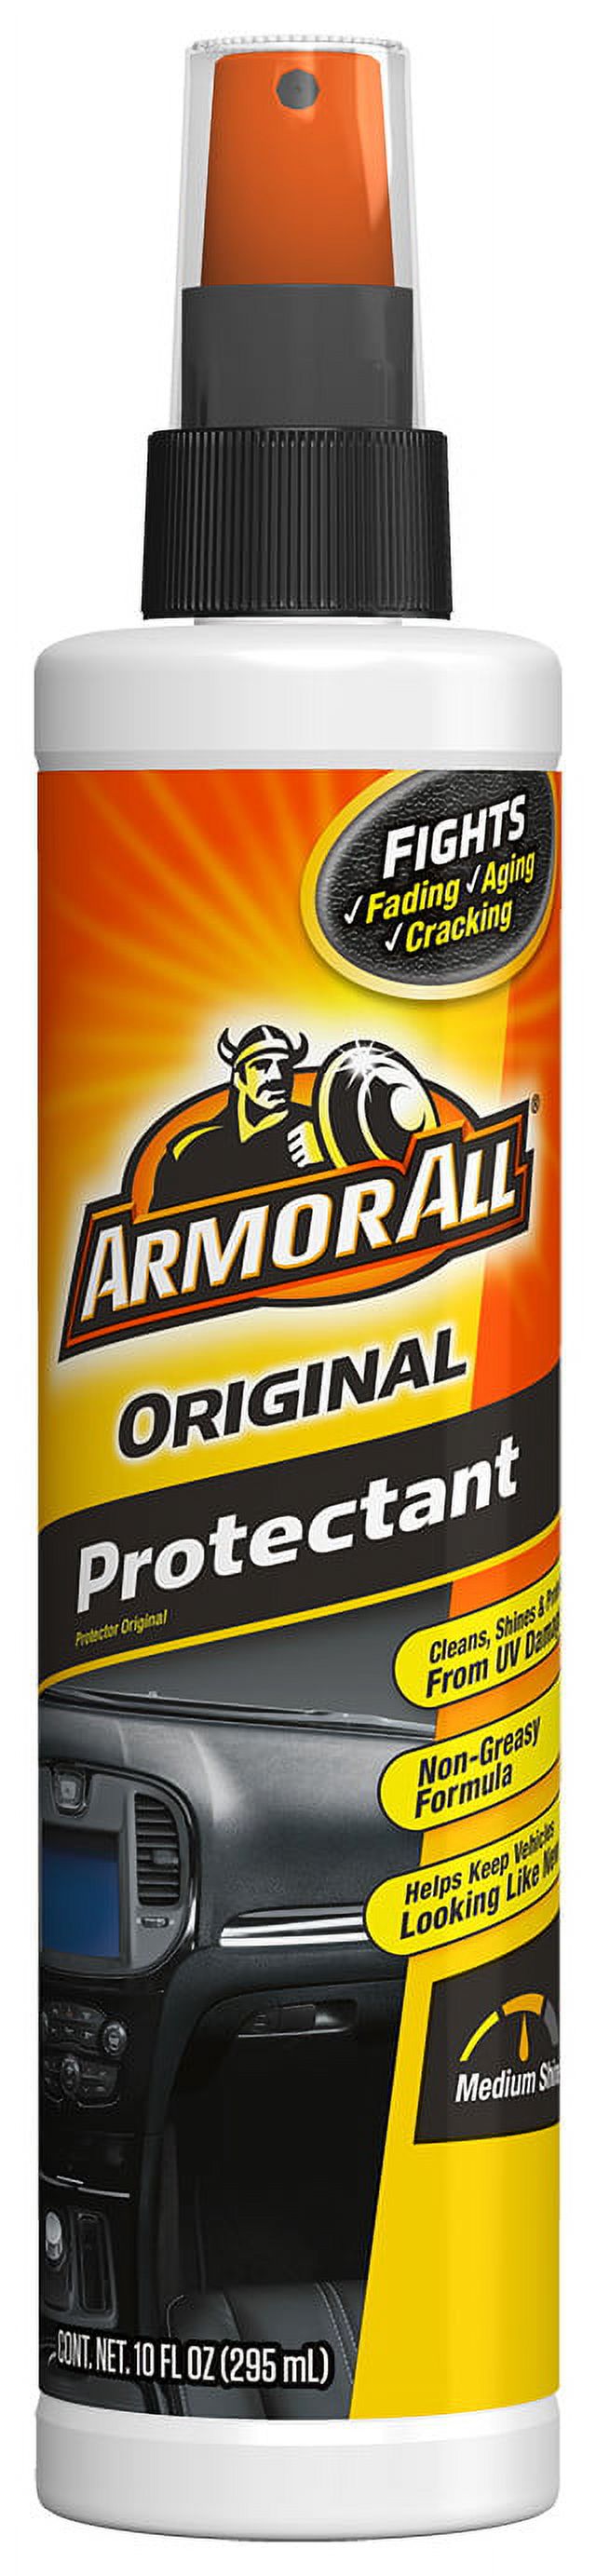 Armor All Ultimate Car Care Holiday Gift Pack (7 Pieces) - image 3 of 14